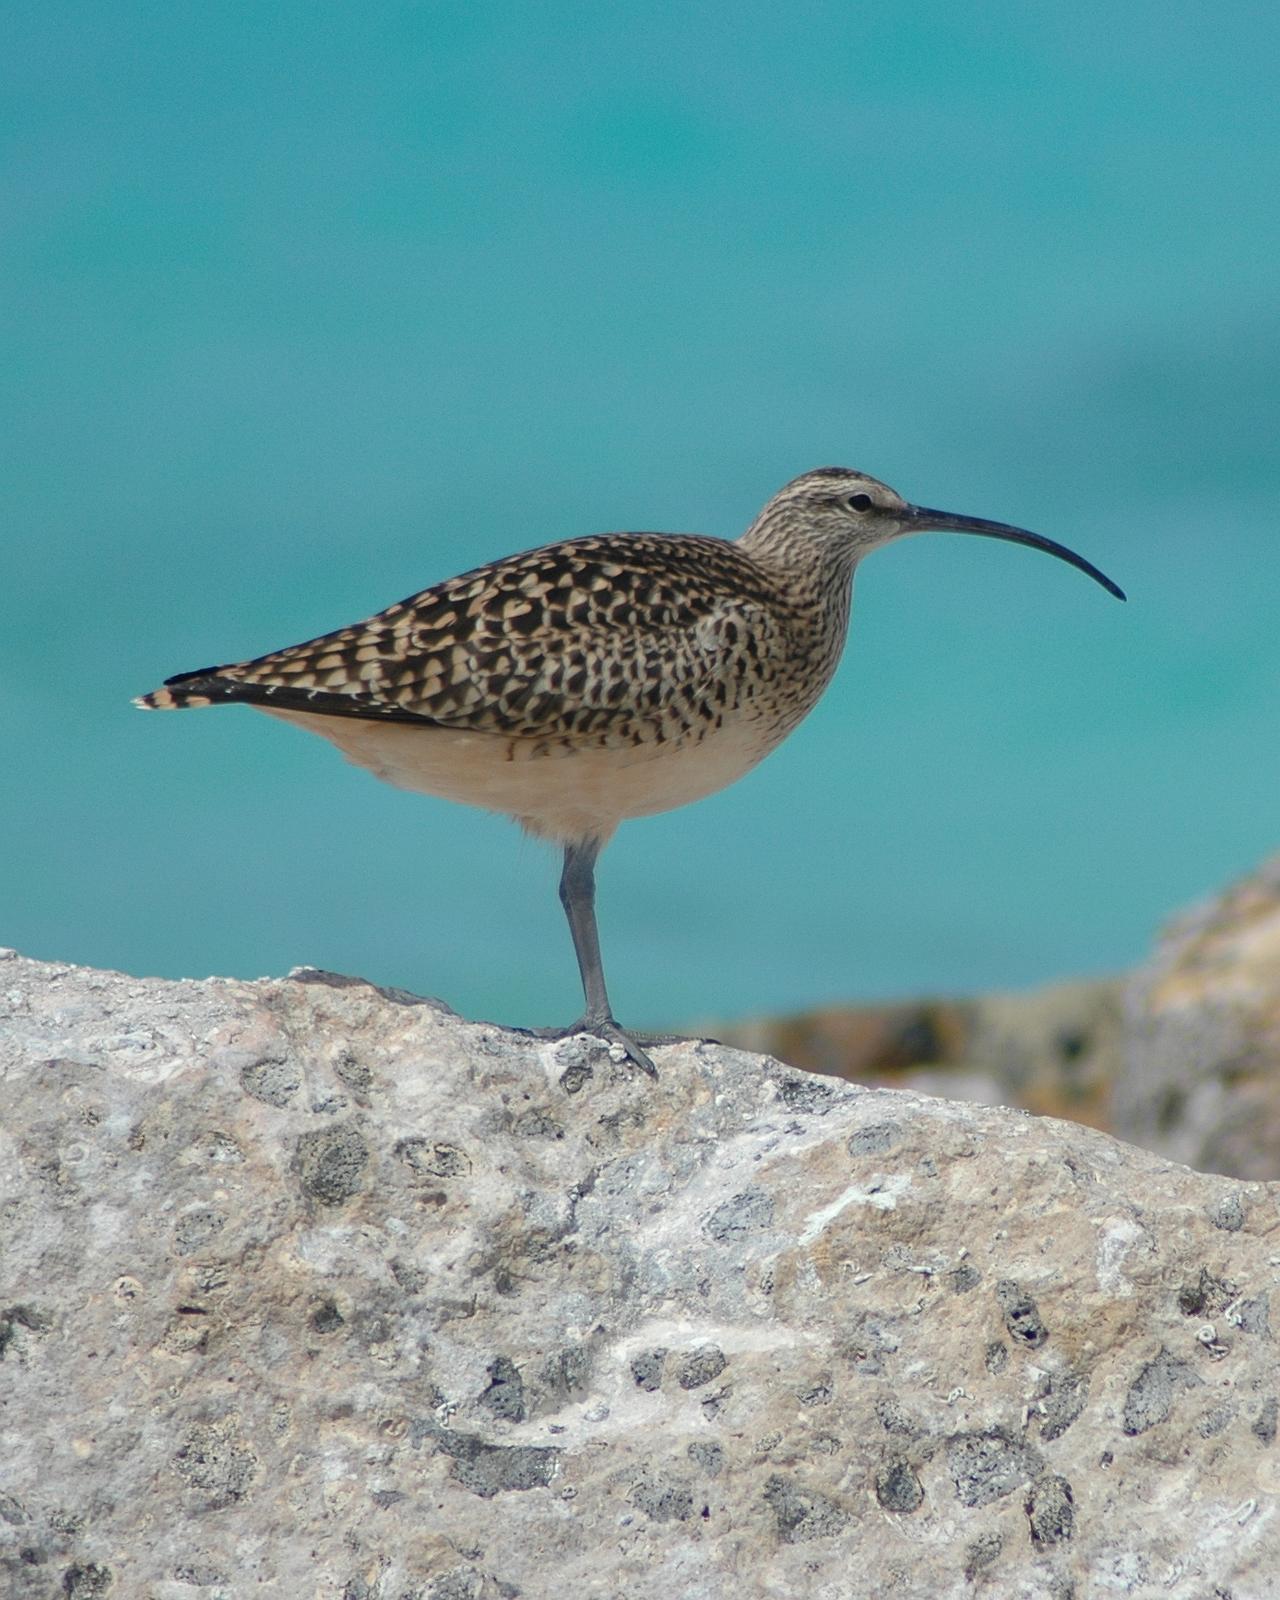 Bristle-thighed Curlew Photo by Steve Tucker